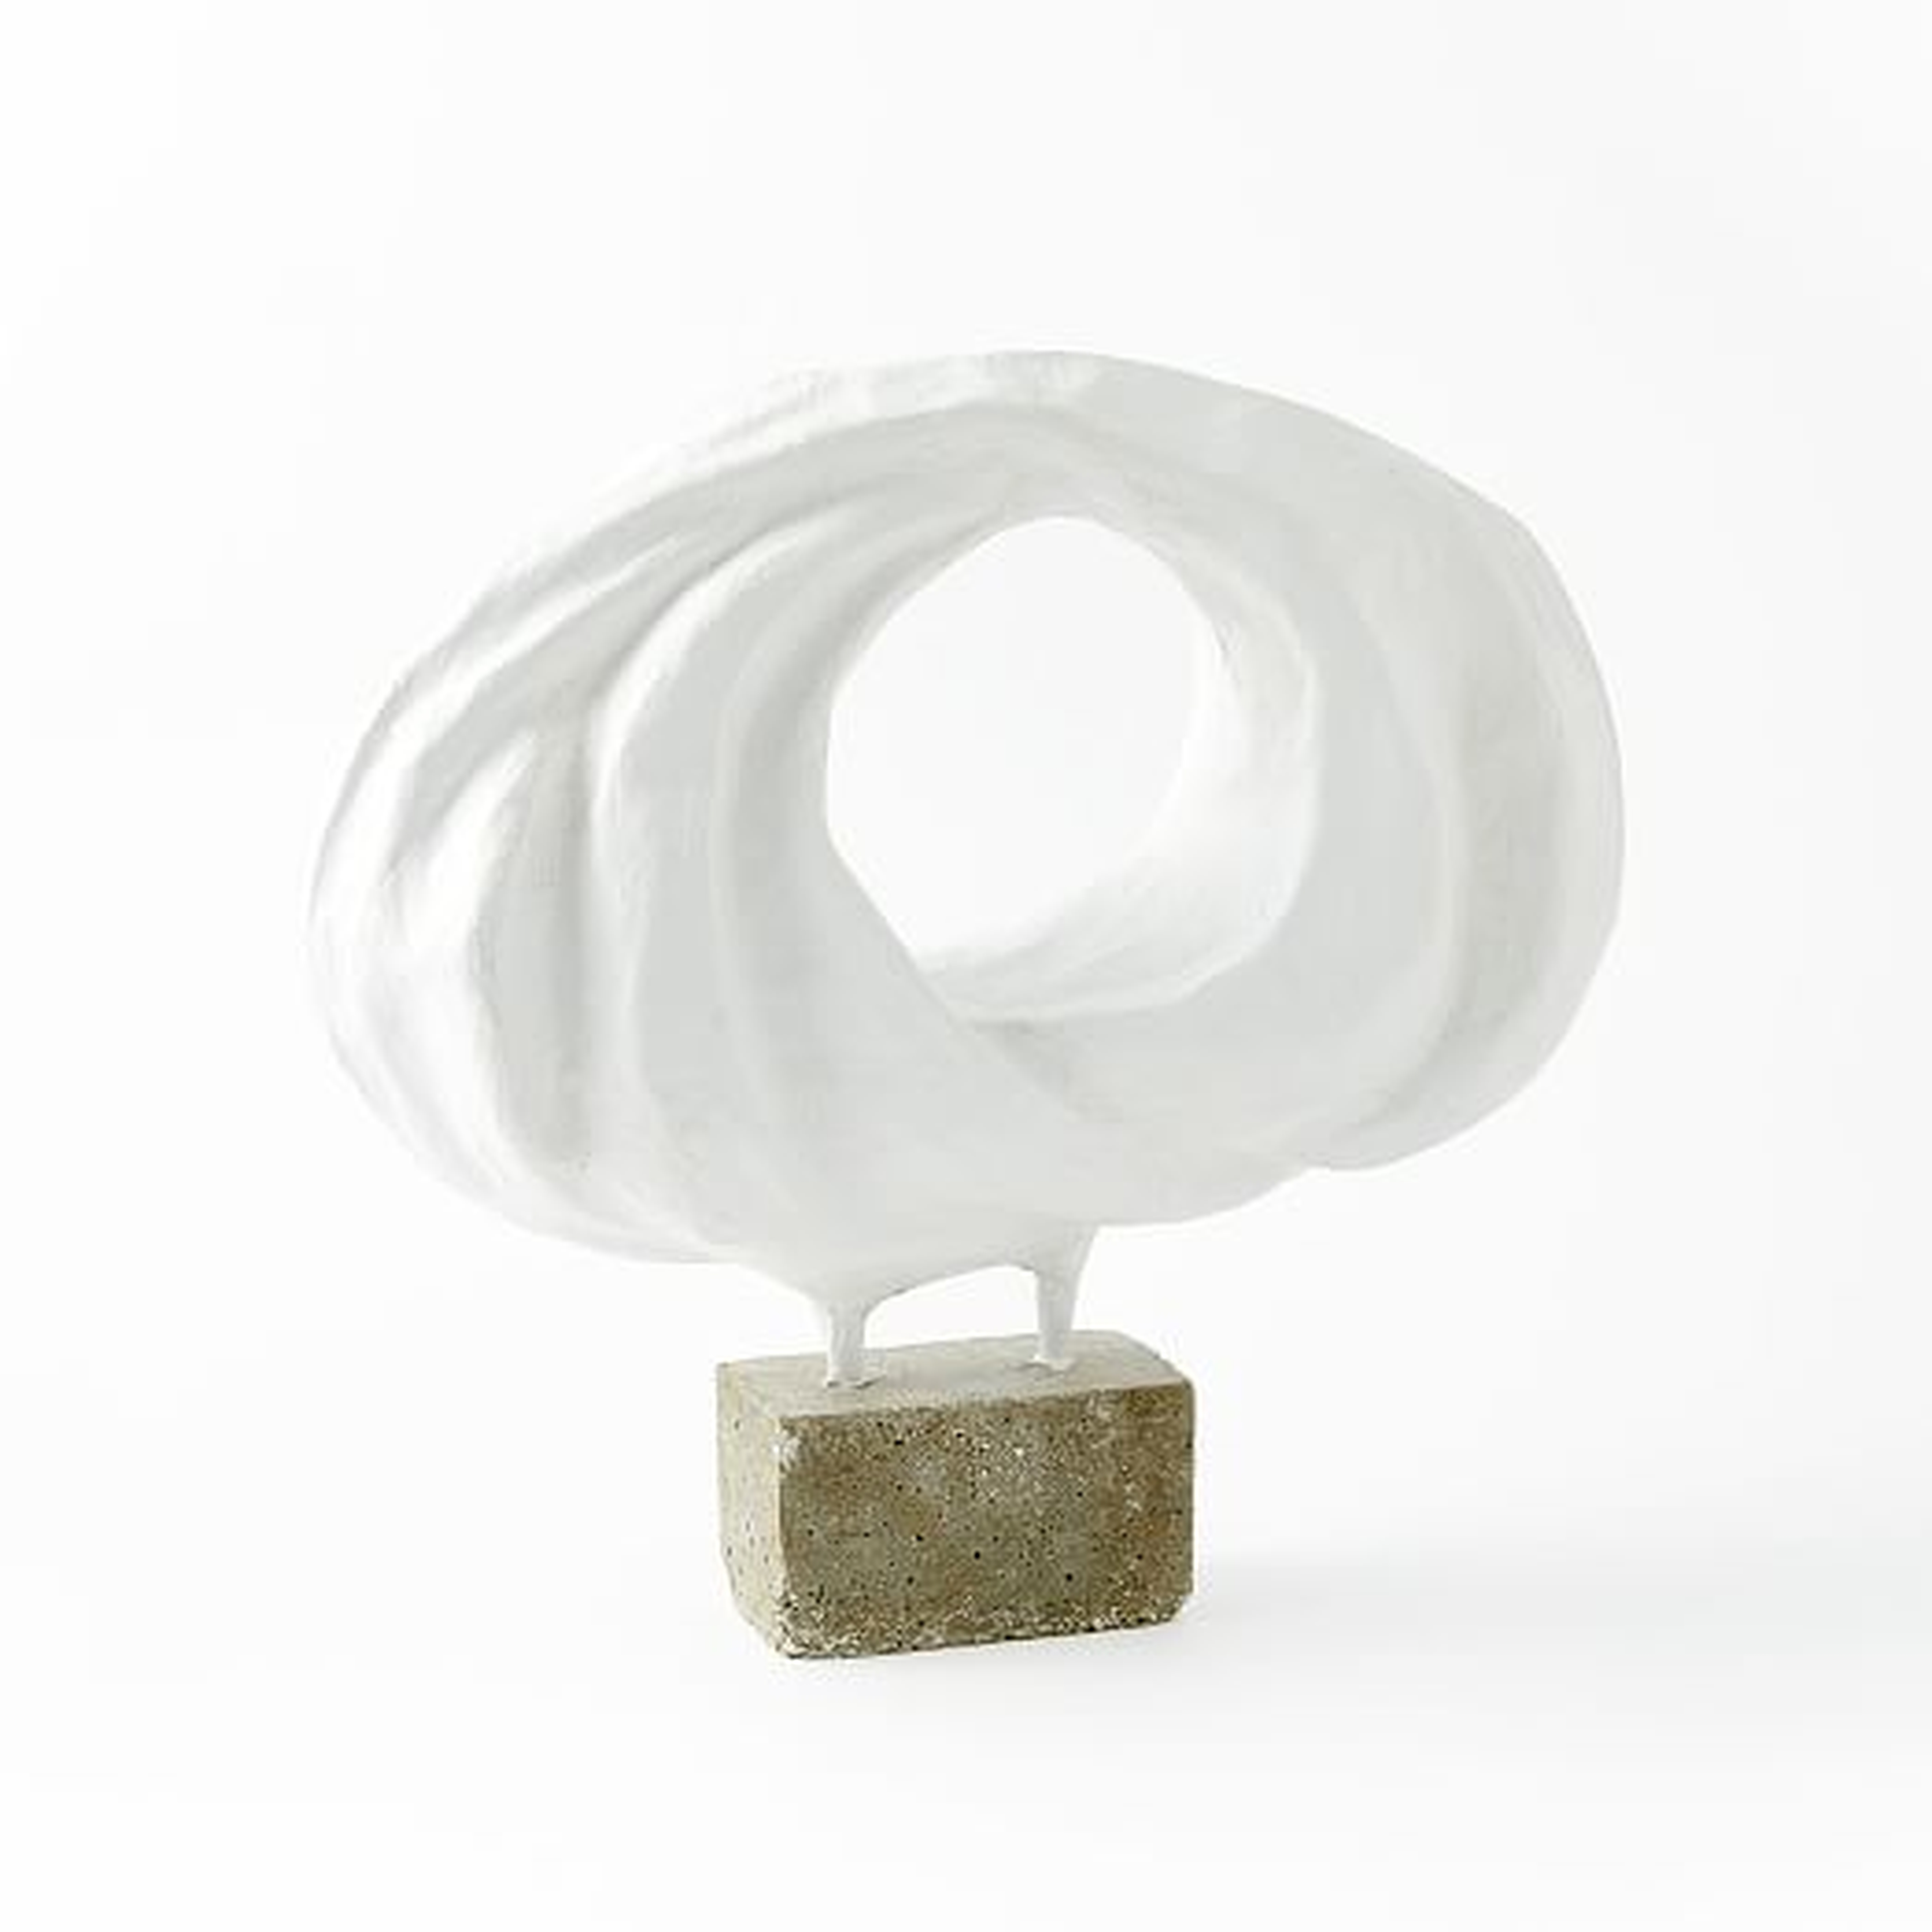 Papier-Mache Sculptures on Stand, Short Oval - in store pick up only - West Elm